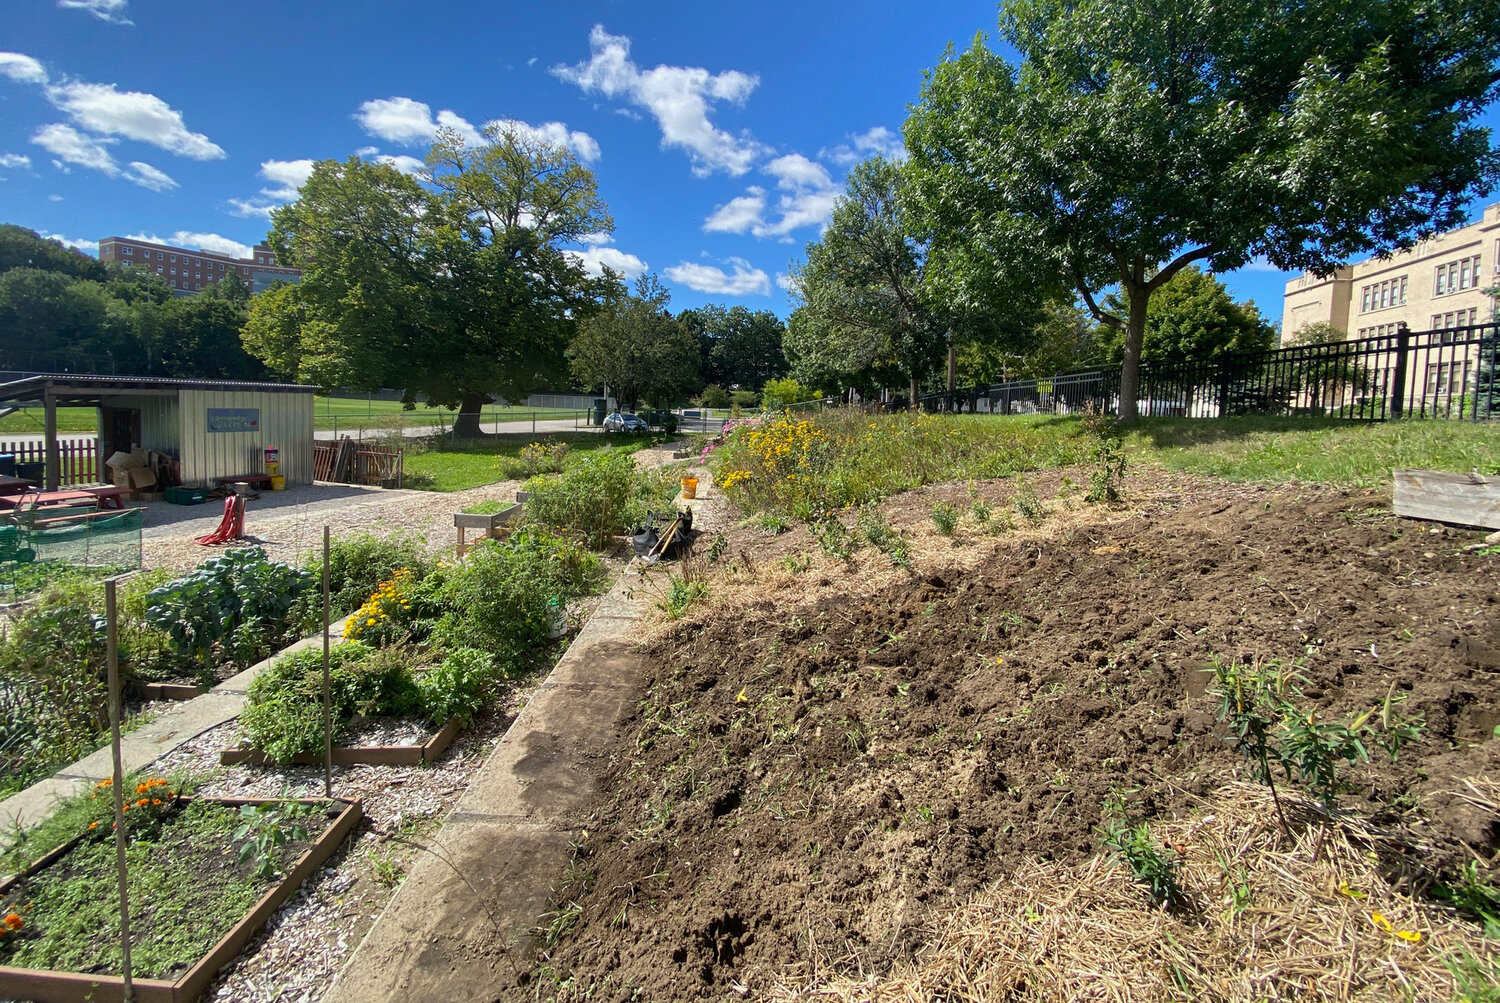 In partnership with the URI Master Gardener Program, Davis Park community gardeners are developing a meadow of native plants at the intersection of Chalkstone Avenue and Oakland Avenue in Providence